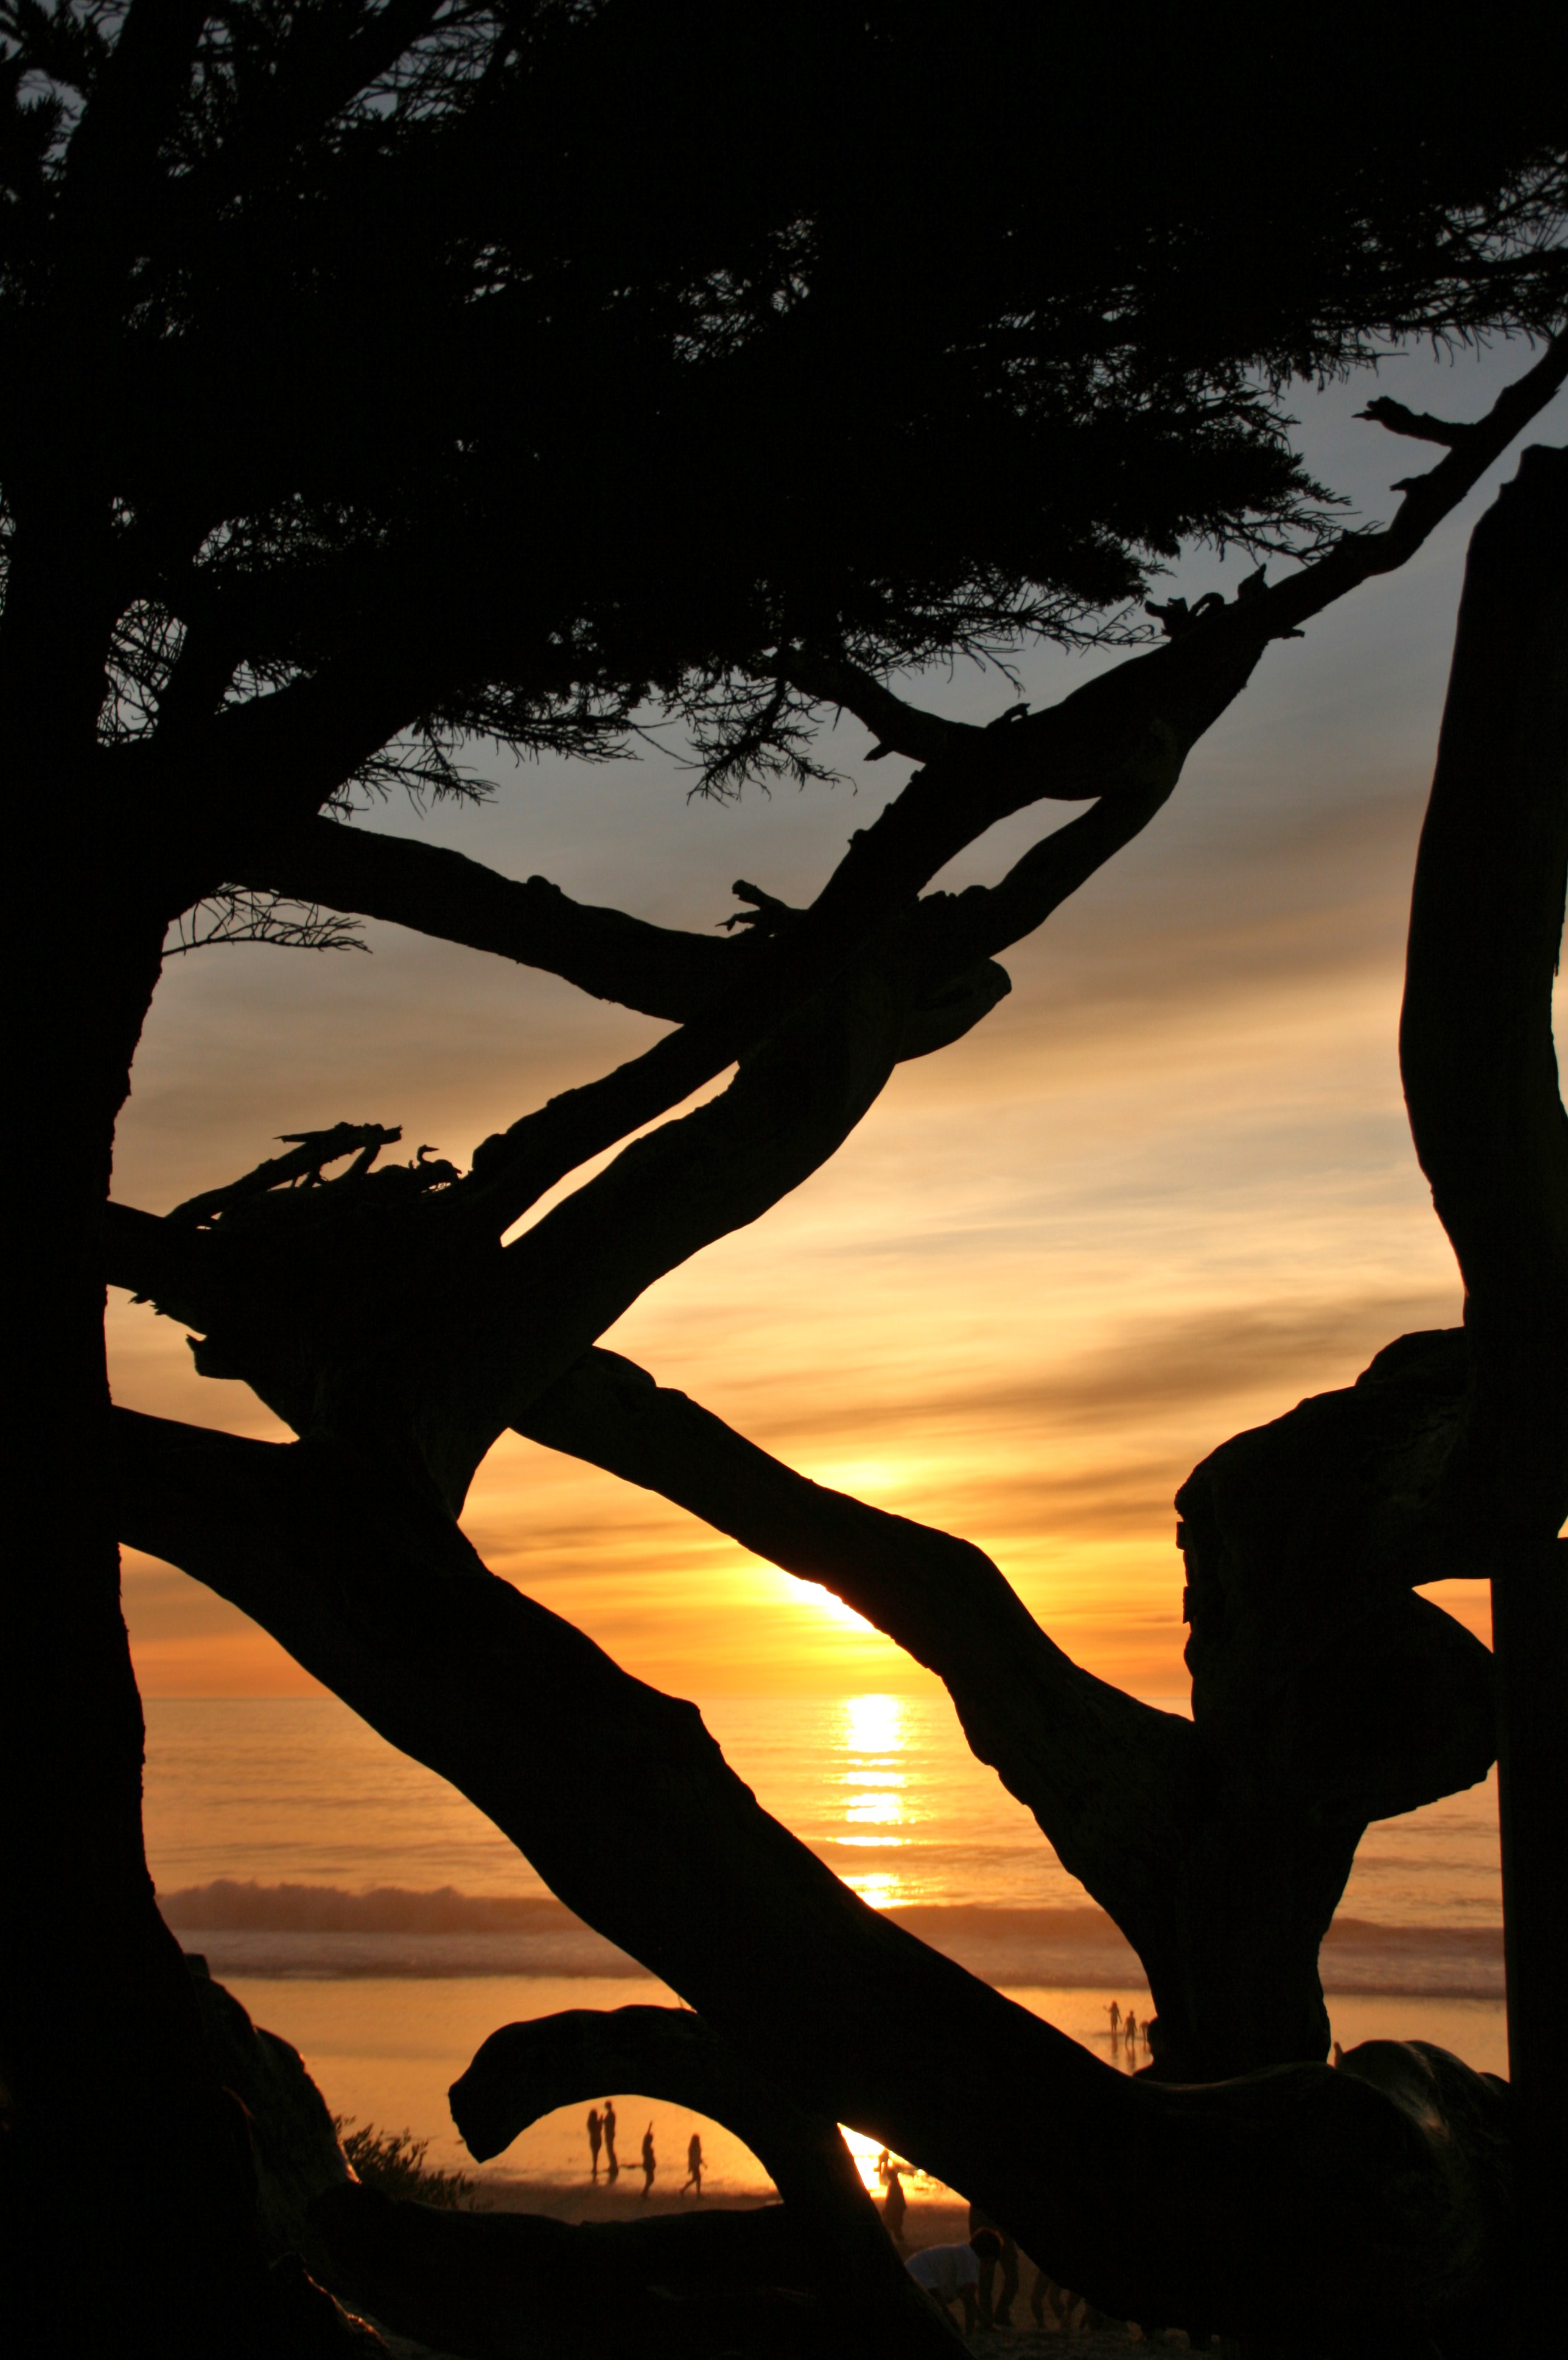 Carmel's famously spectacular sunsets draw huge crowds every evening to the town's beach.